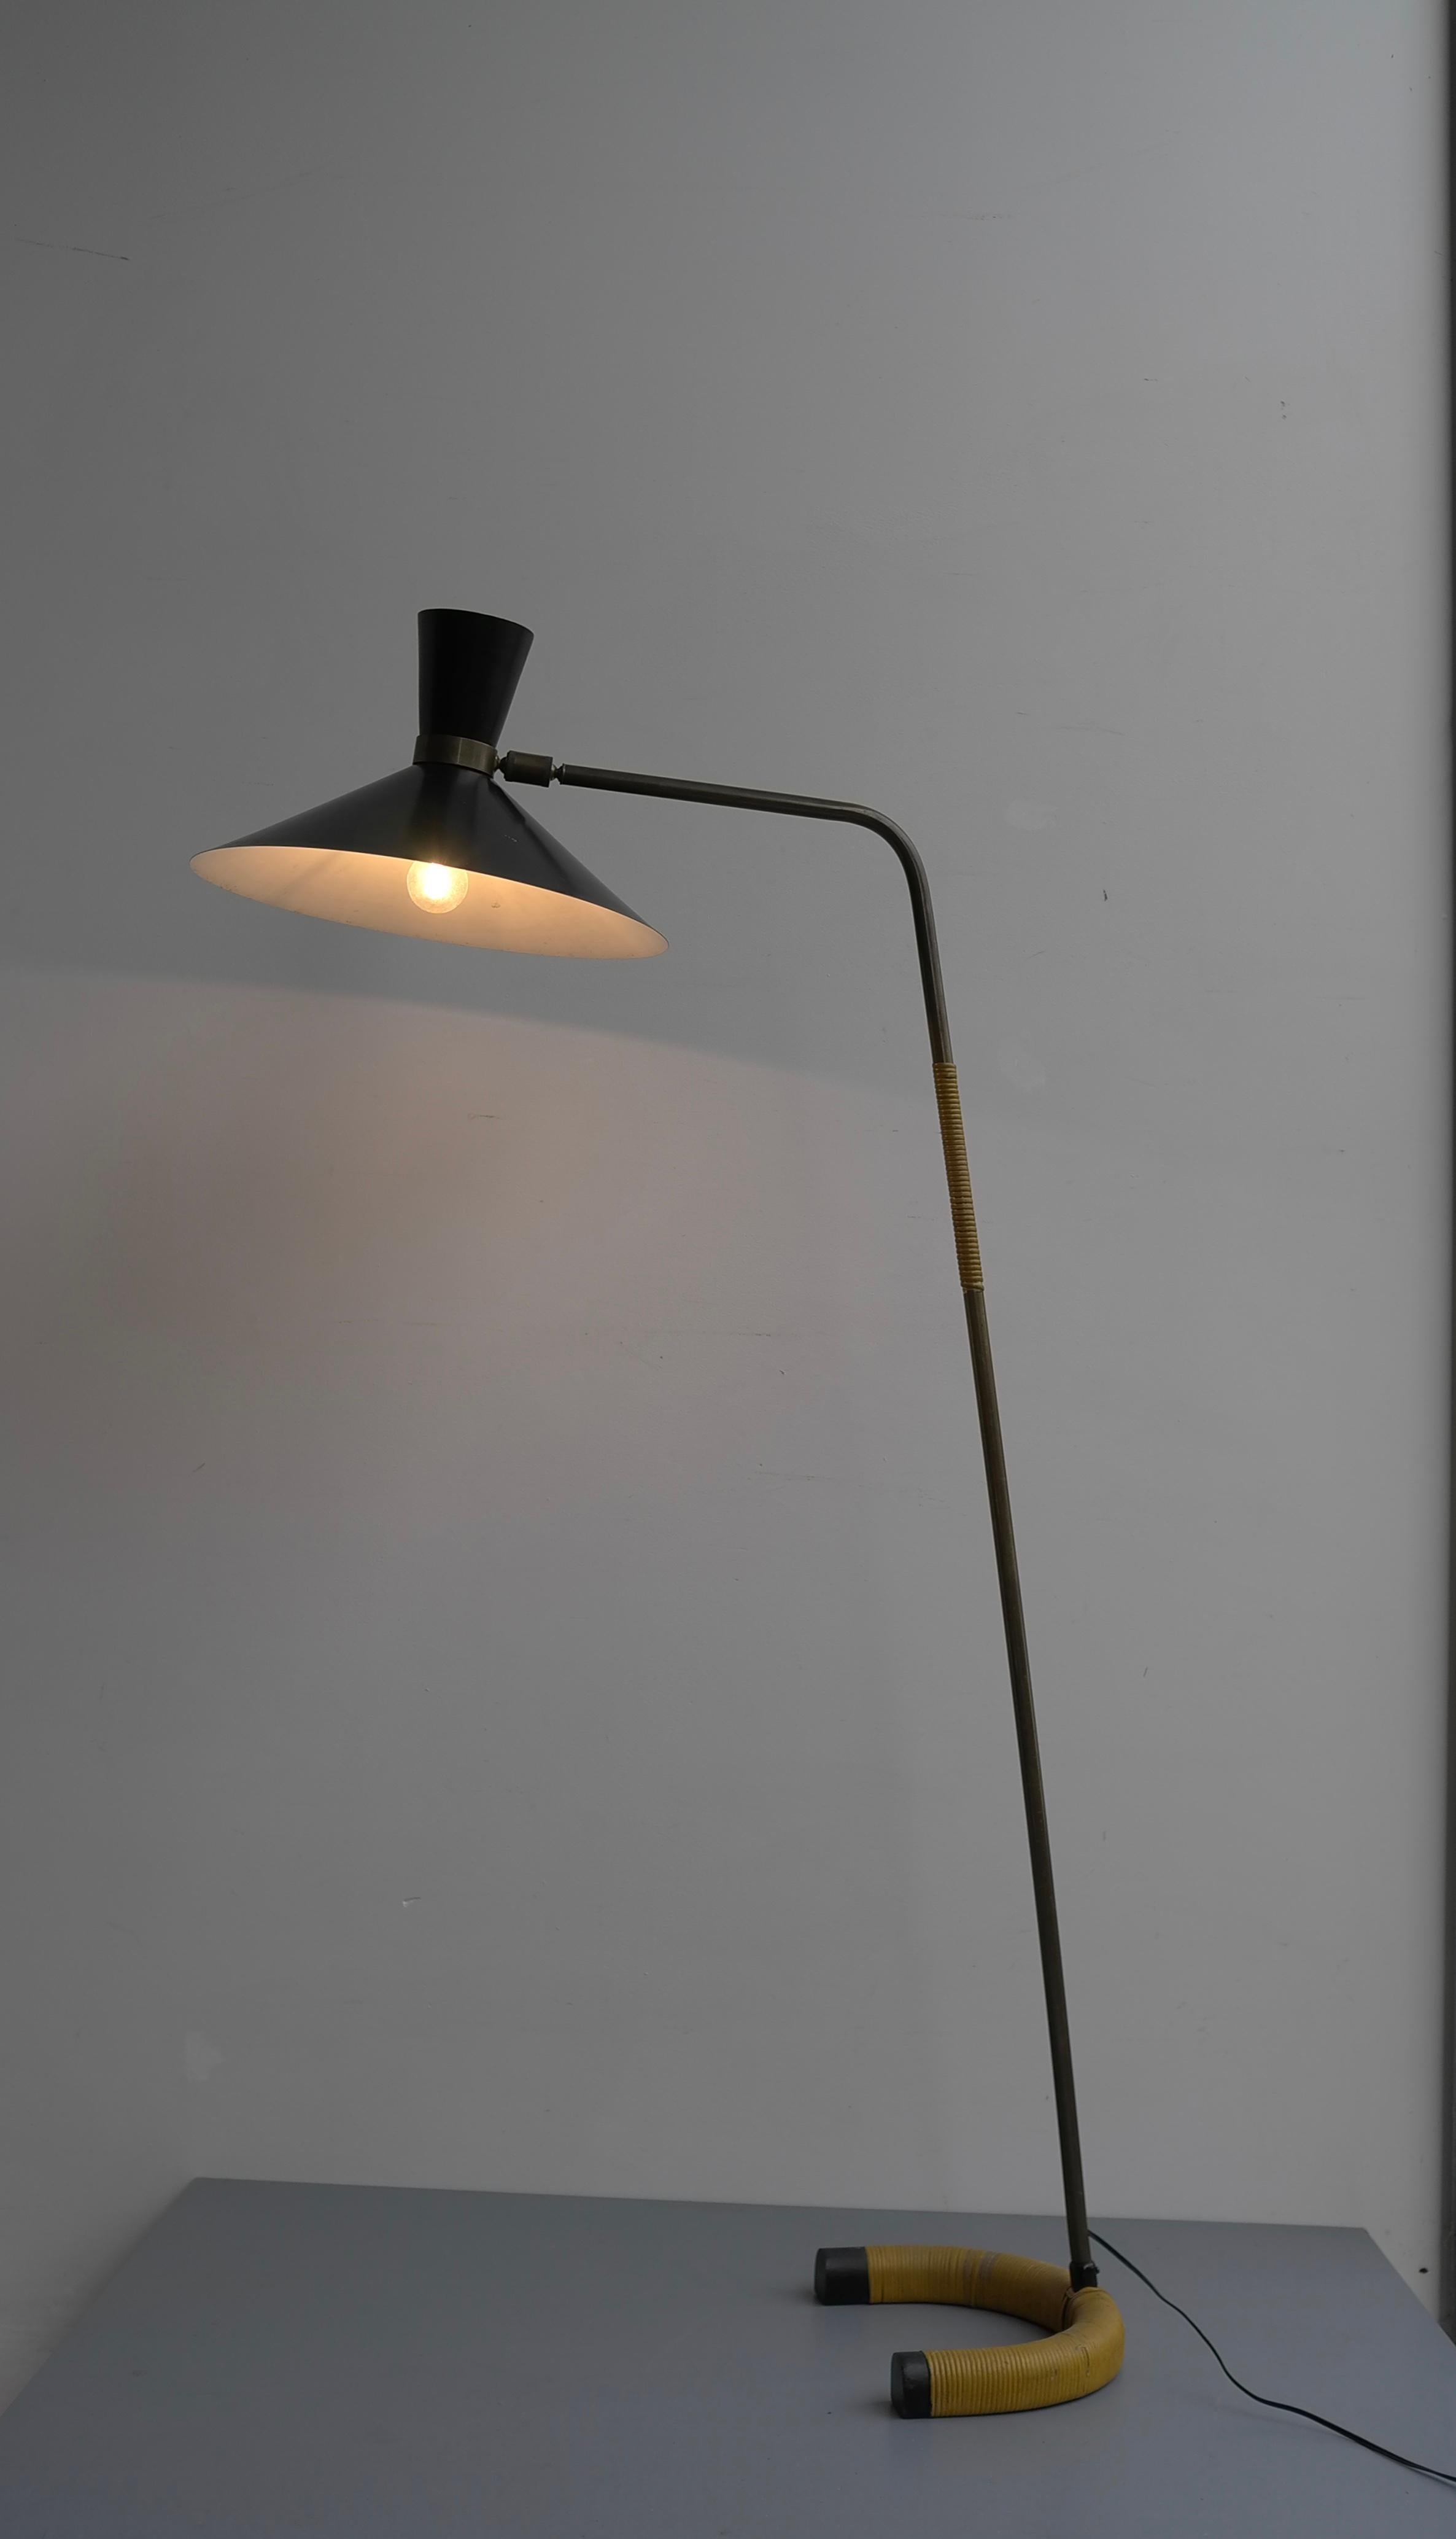 Rare Floor Lamp by Jacques Biny in Brass and Black Hood Edition Luminalite, 1953 For Sale 3